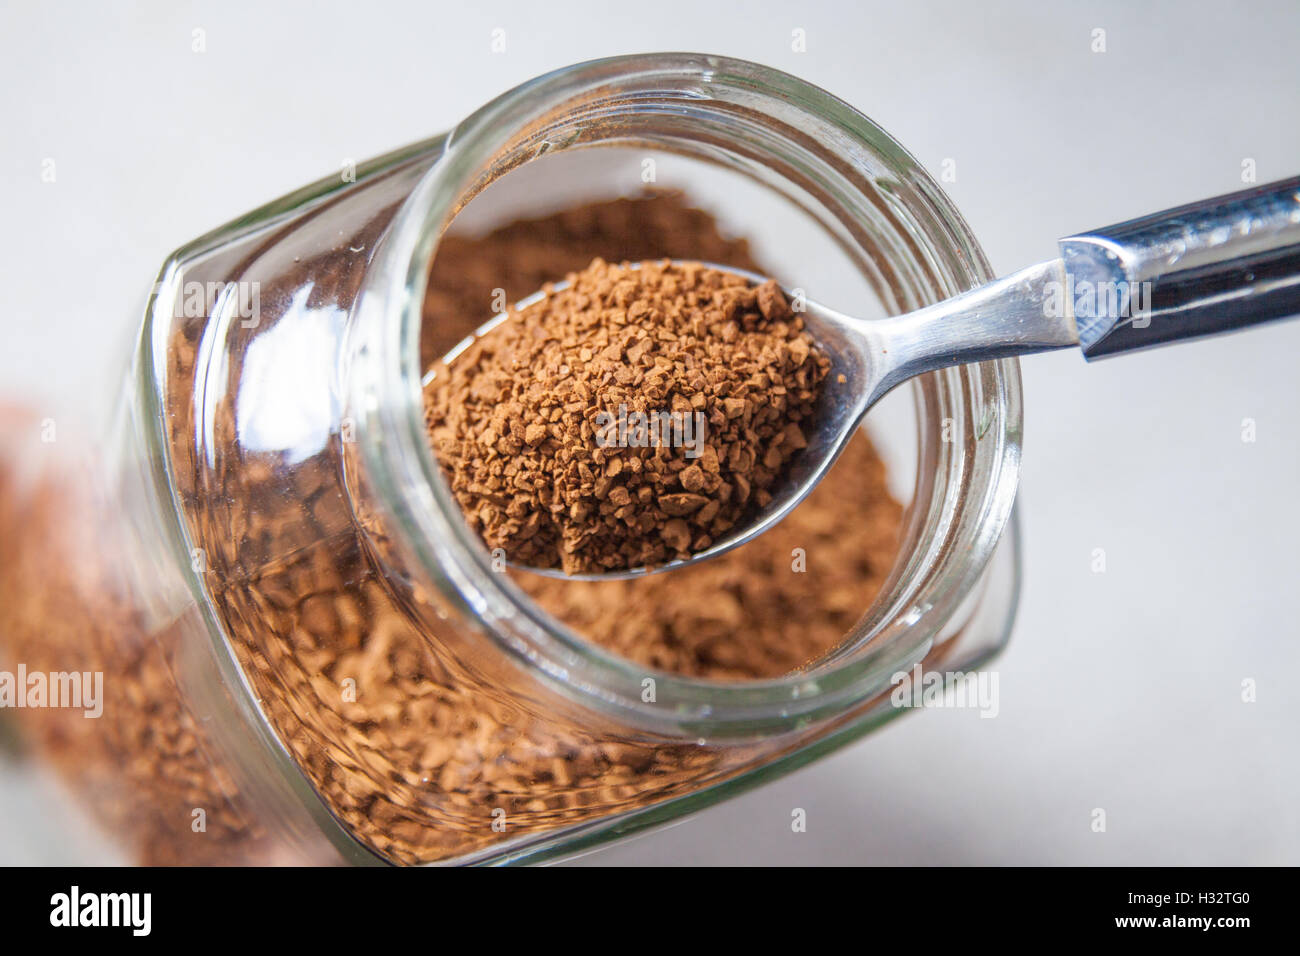 A spoon in a jar of instant coffee granules. Stock Photo